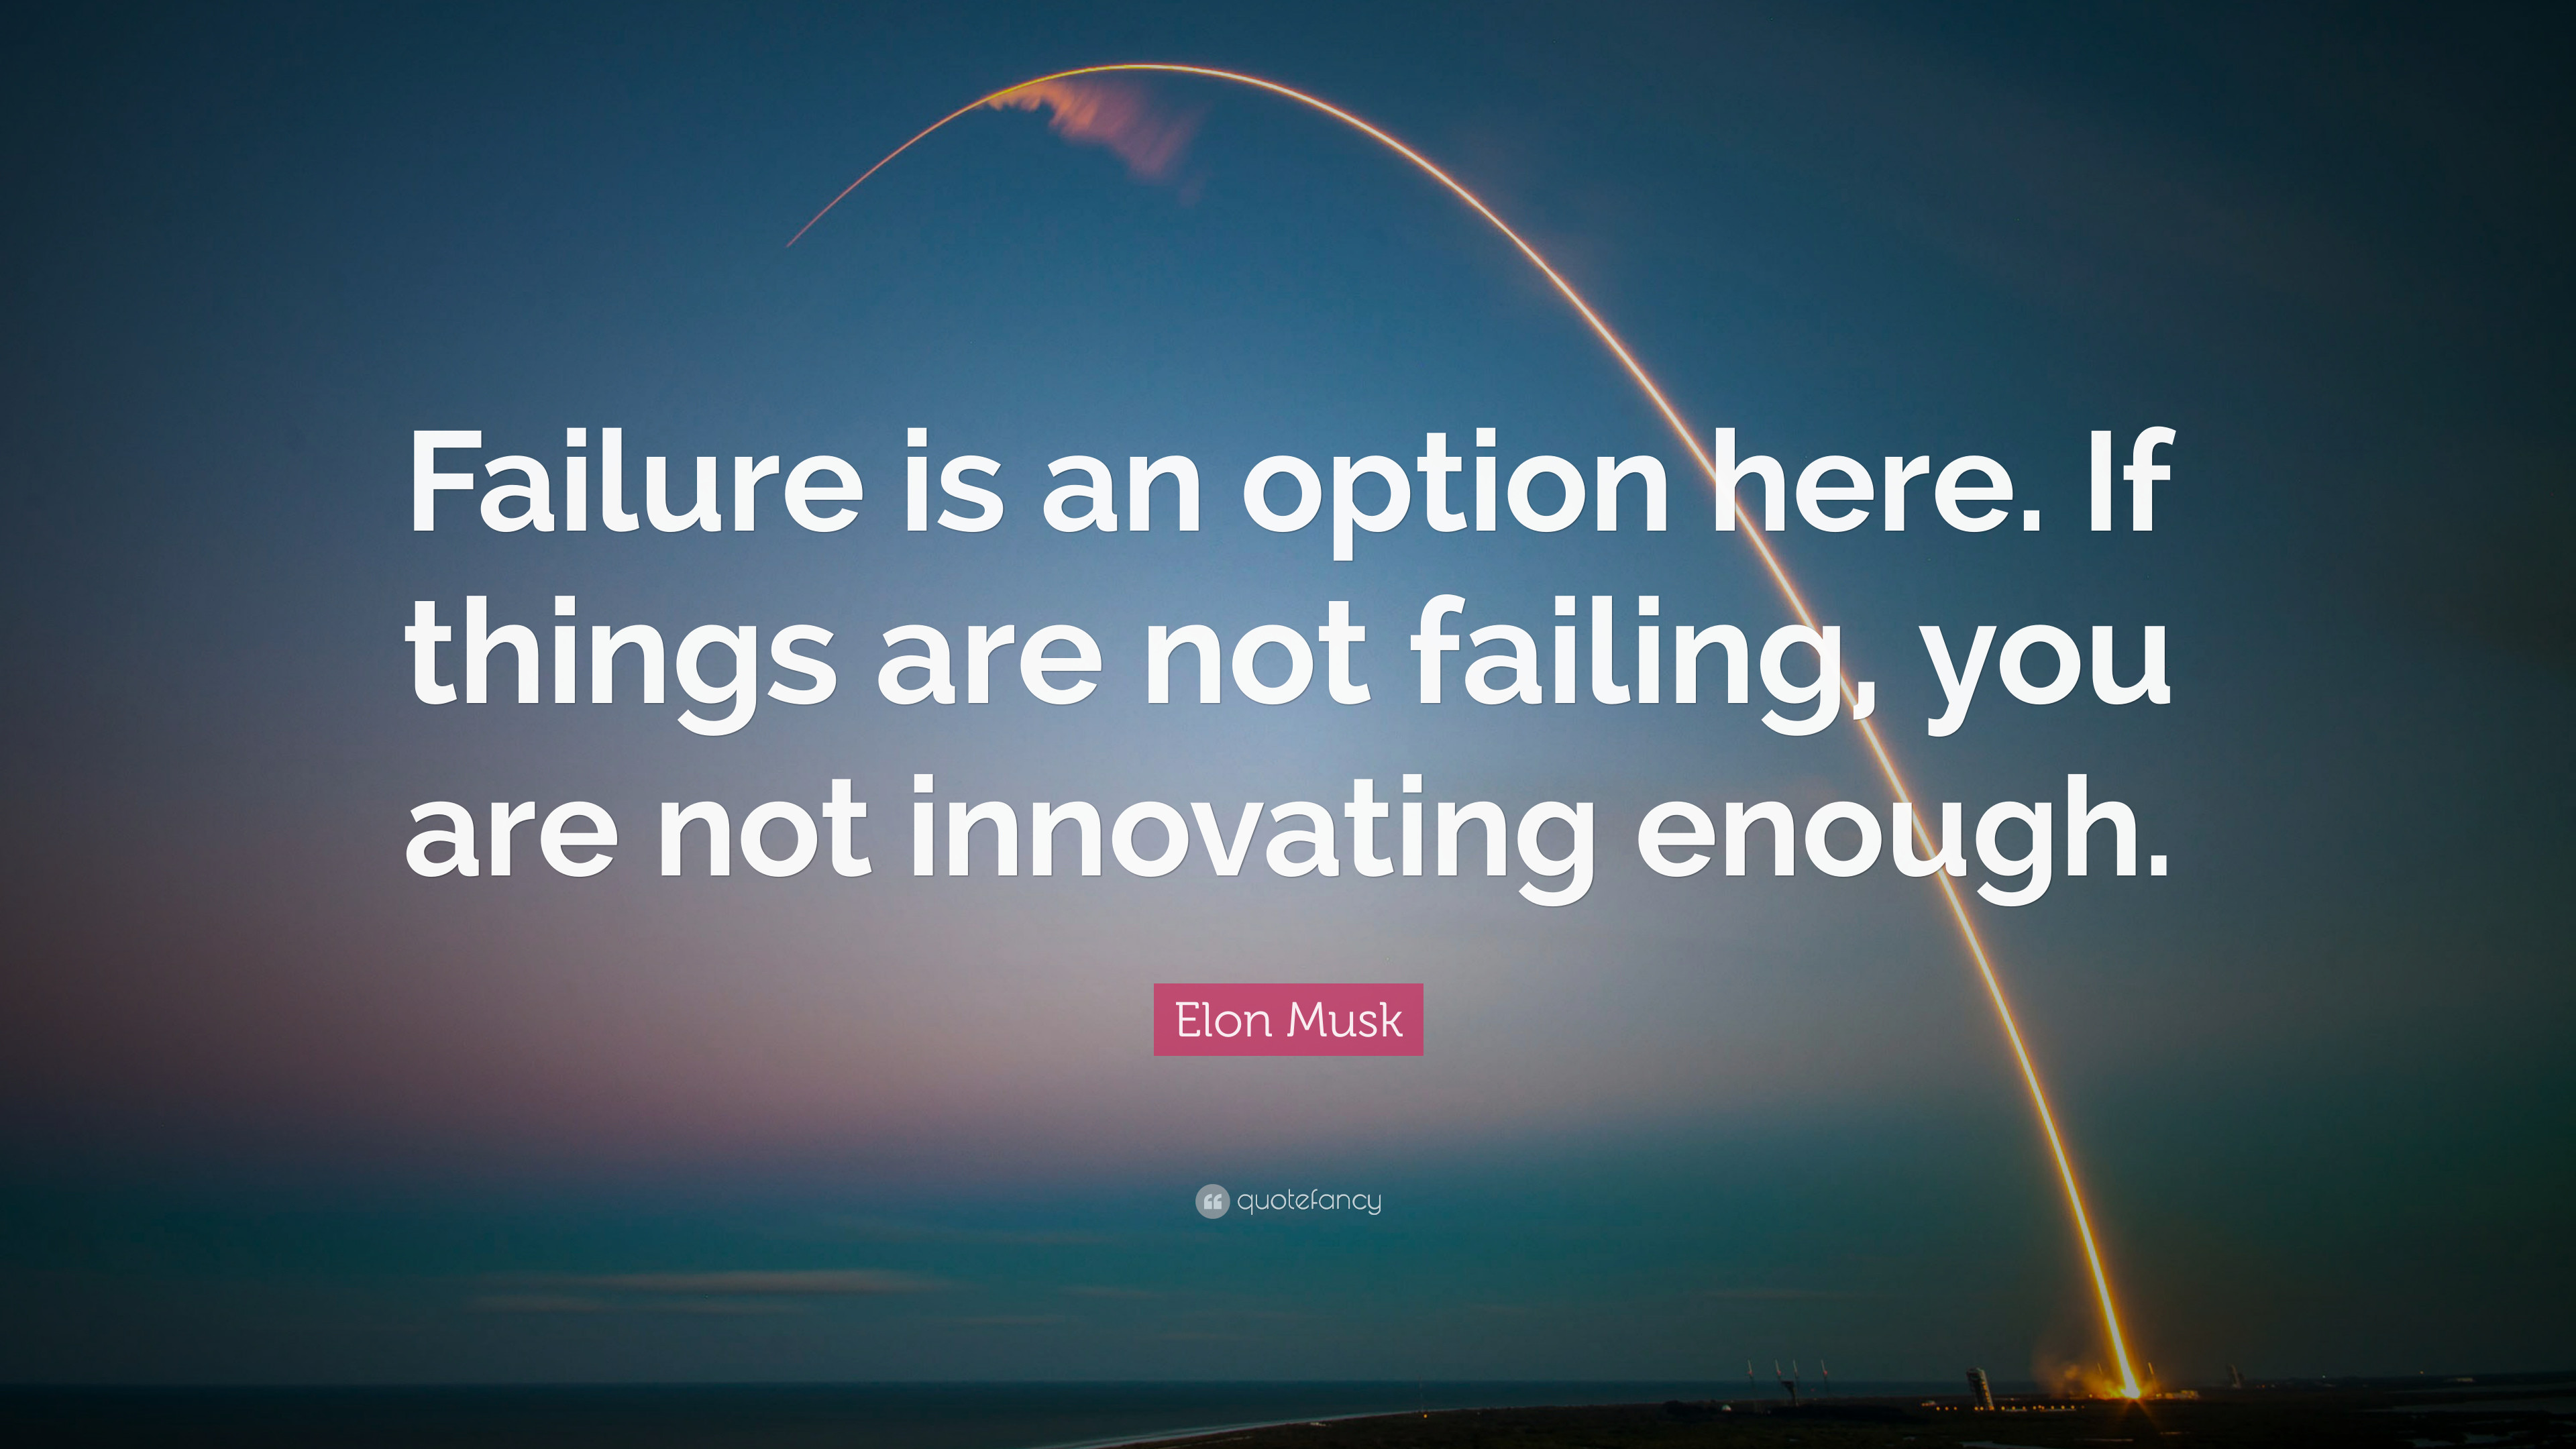 3840x2160 Elon Musk Quote: “Failure is an option here. If things are not failing